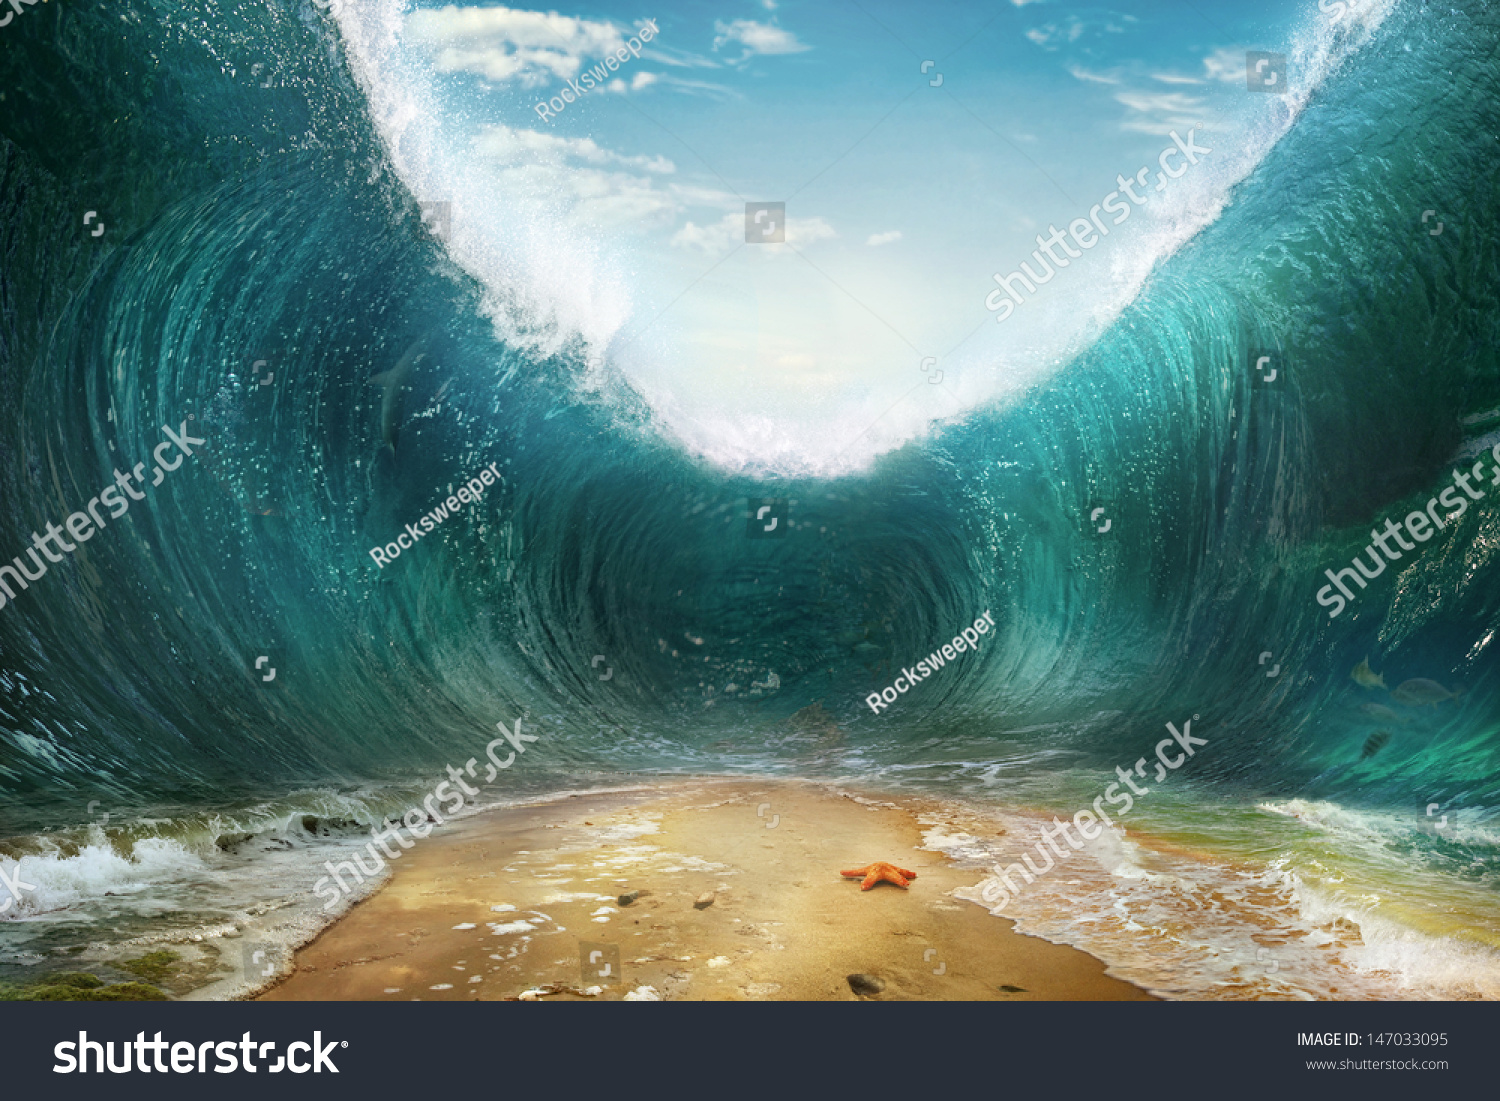 Red Sea Parting Wallpaper Imgkid The Image Kid